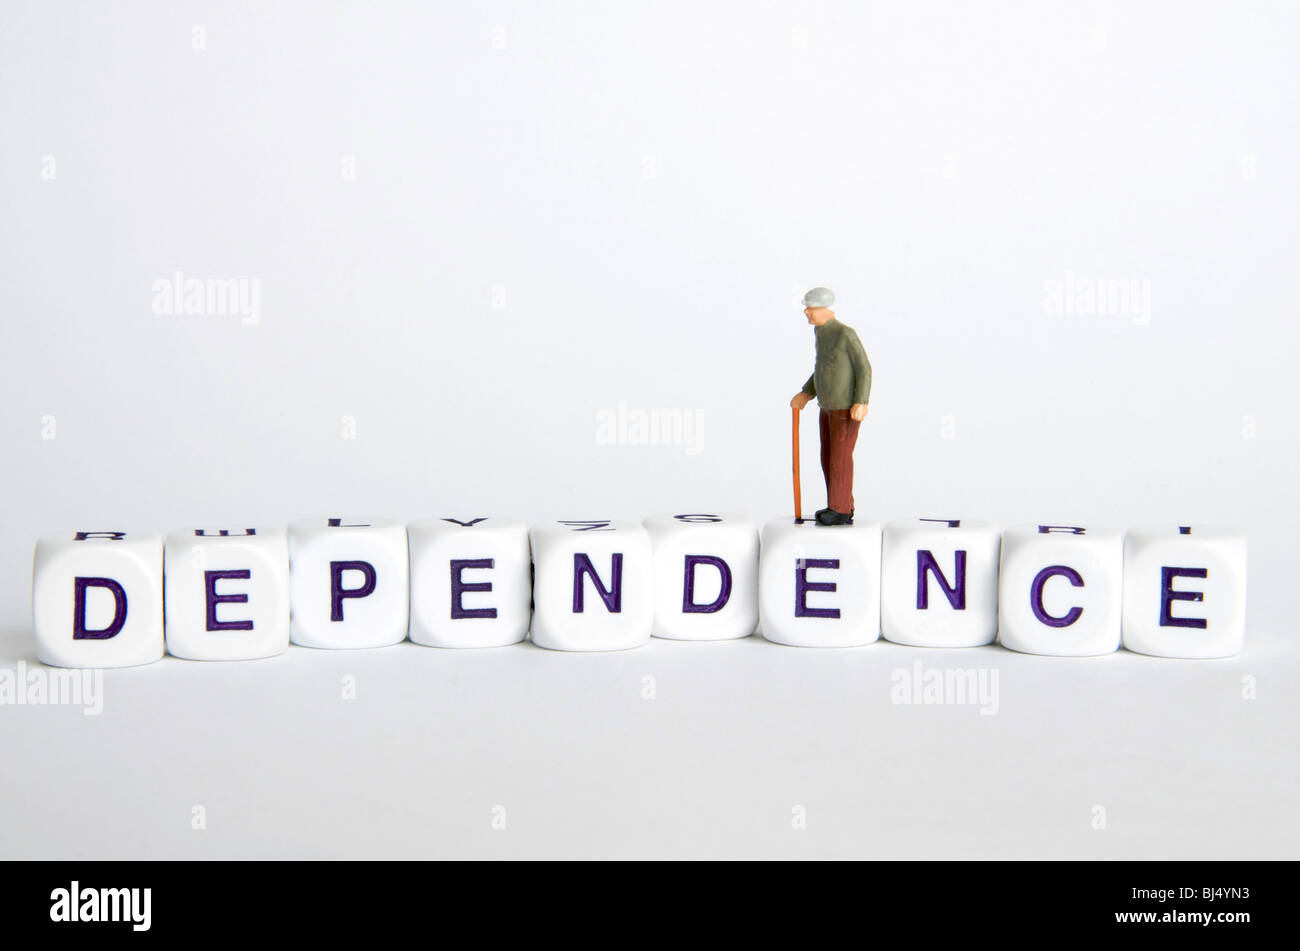 Elderly dependence / independence concept - old man figure standing on the word 'Dependence'. Stock Photo